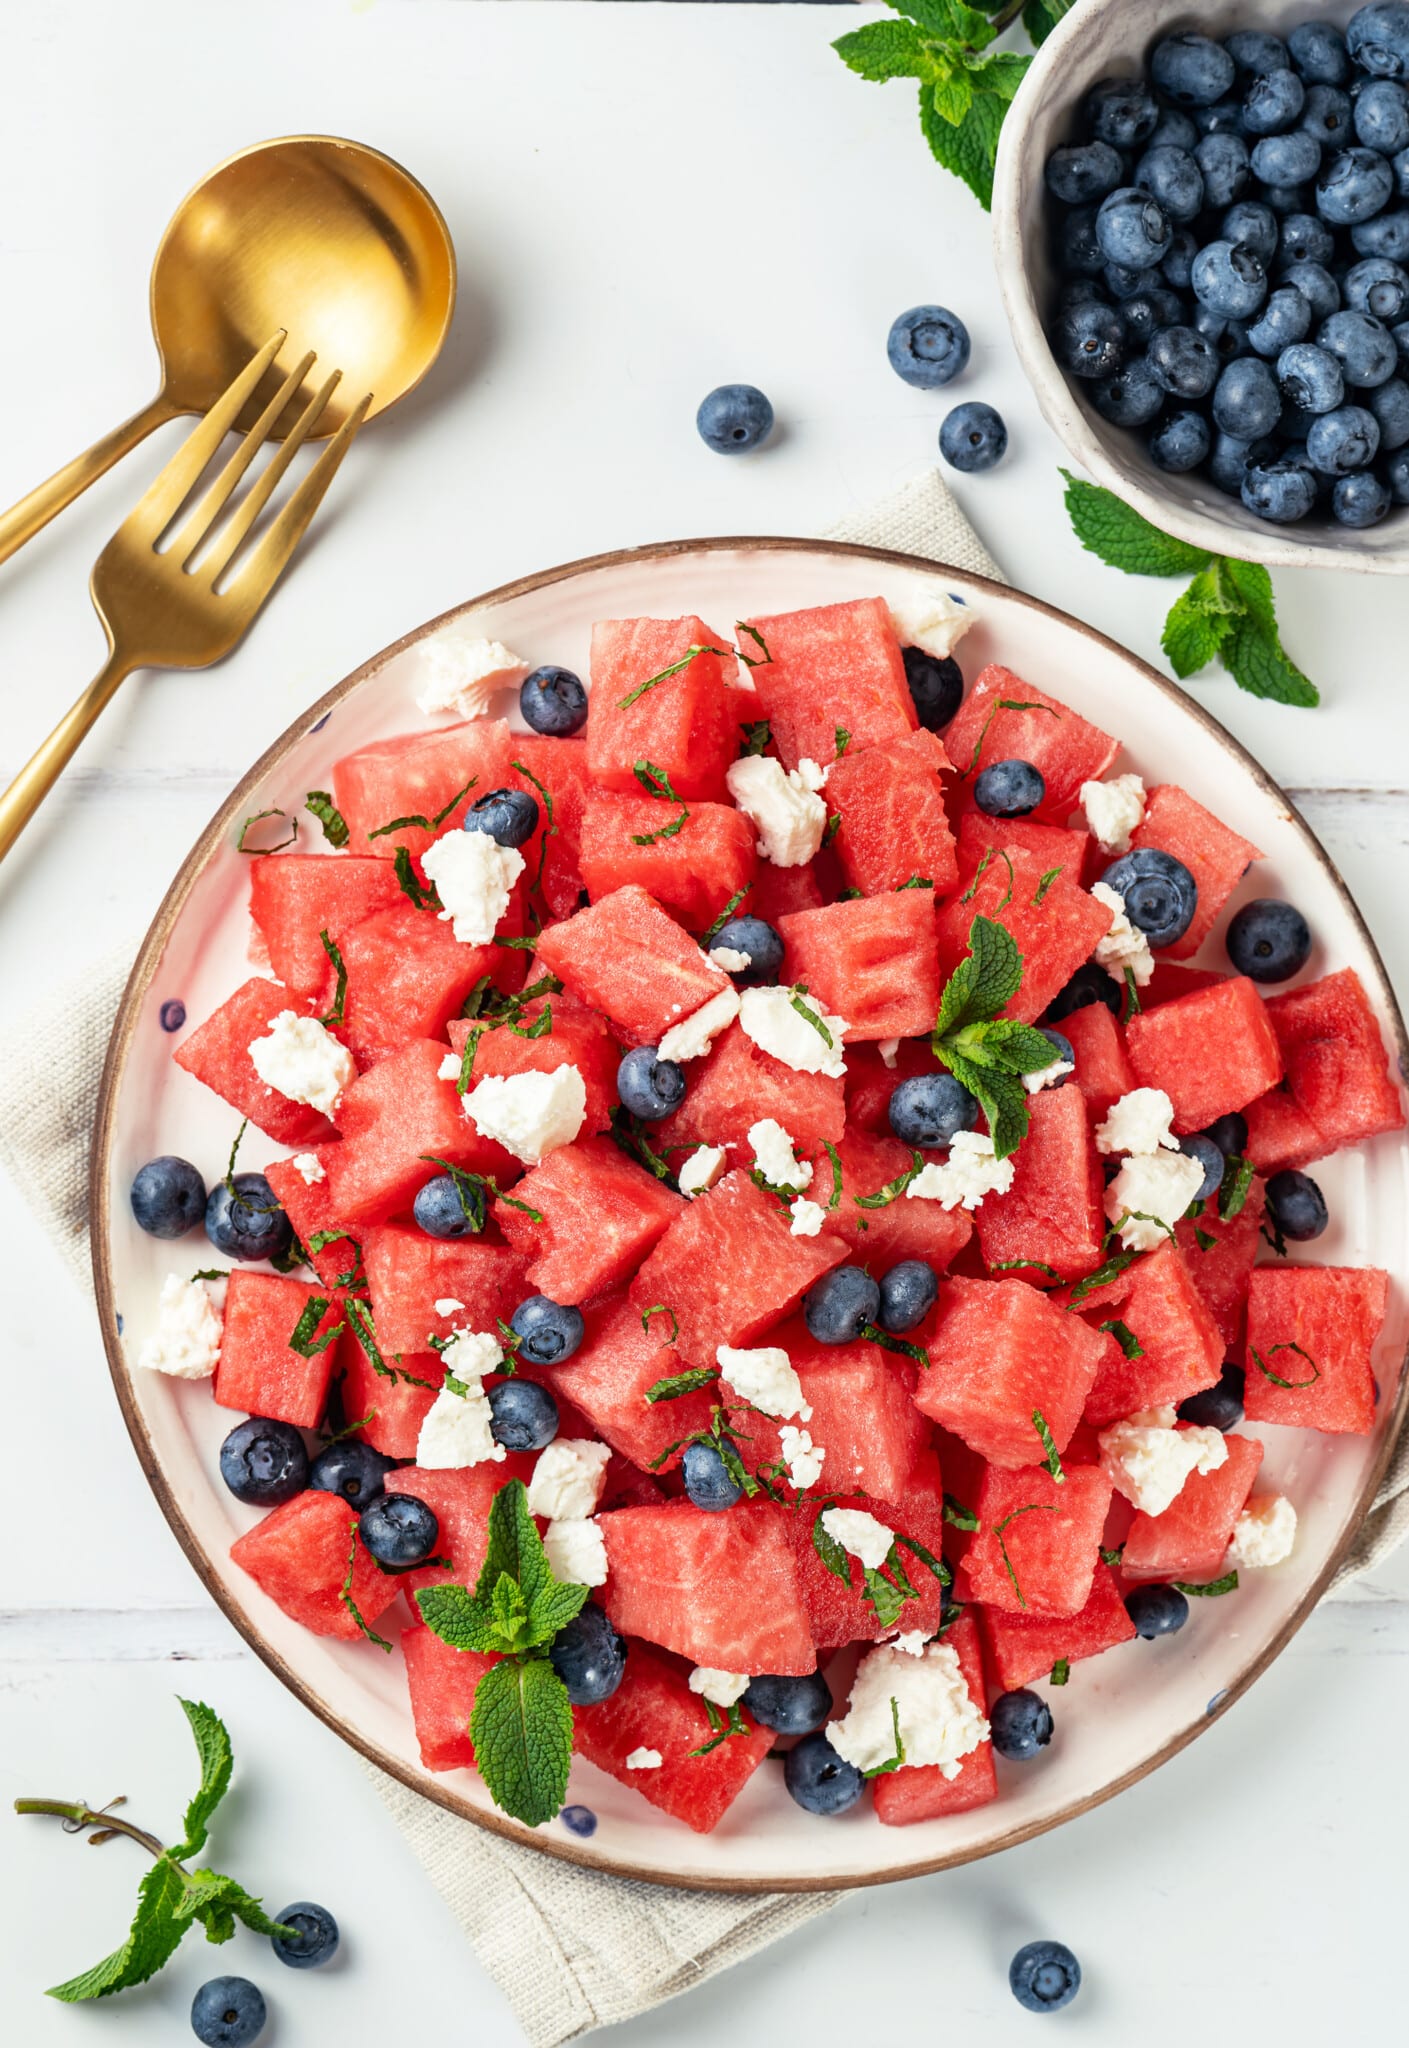 Watermelon Salad with Blueberries and Feta